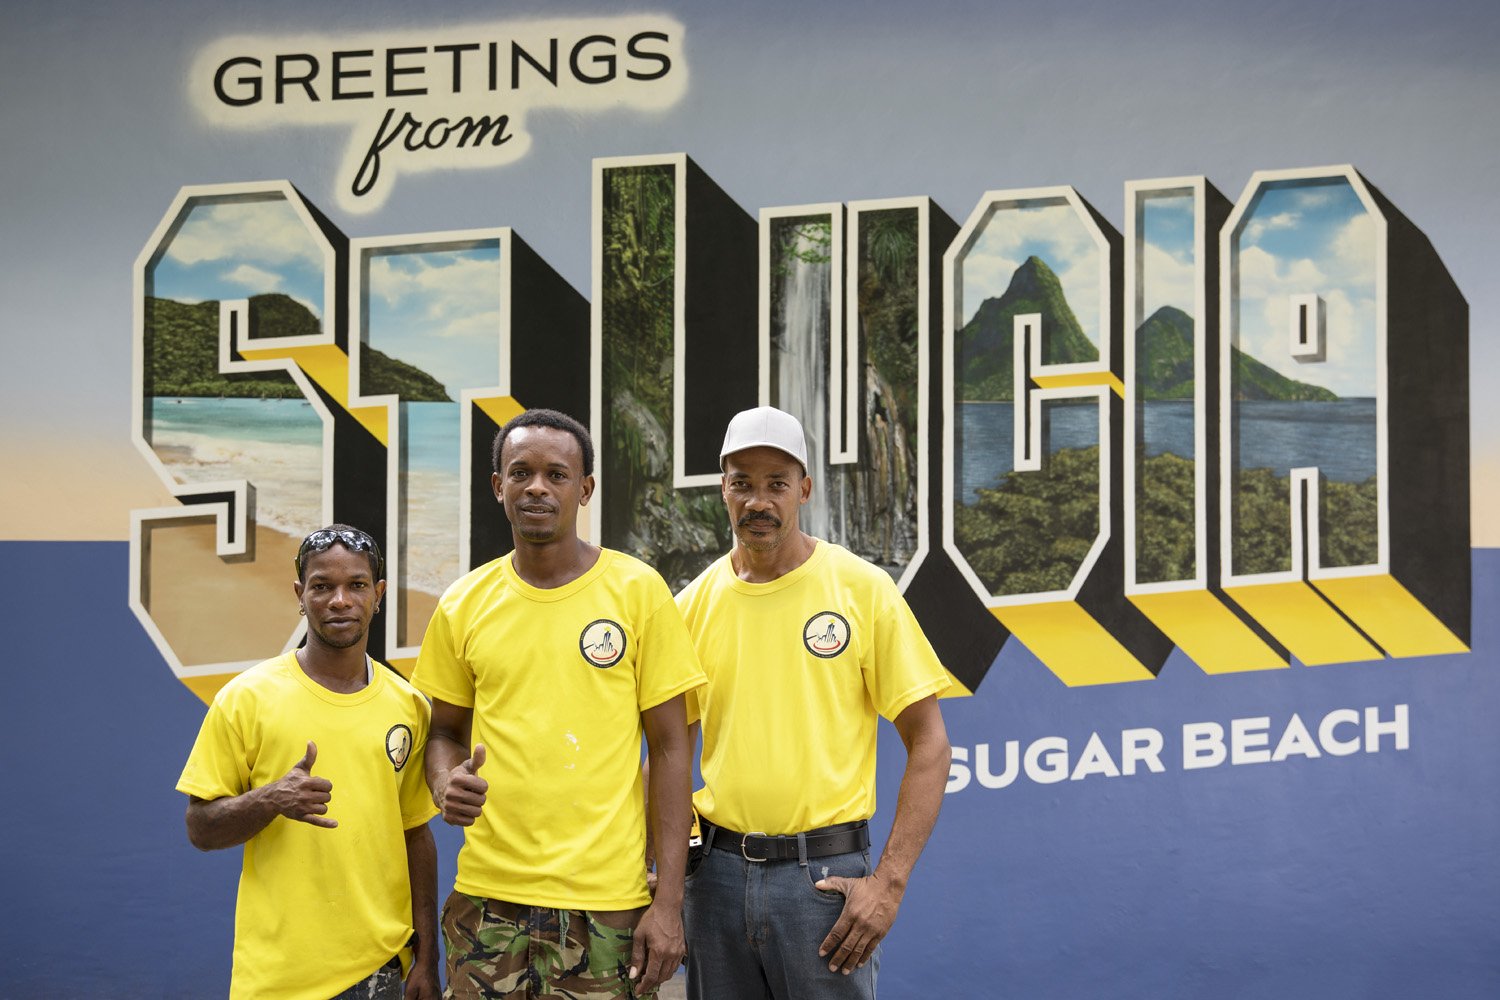 Local contractors in front of St. Lucia Mural